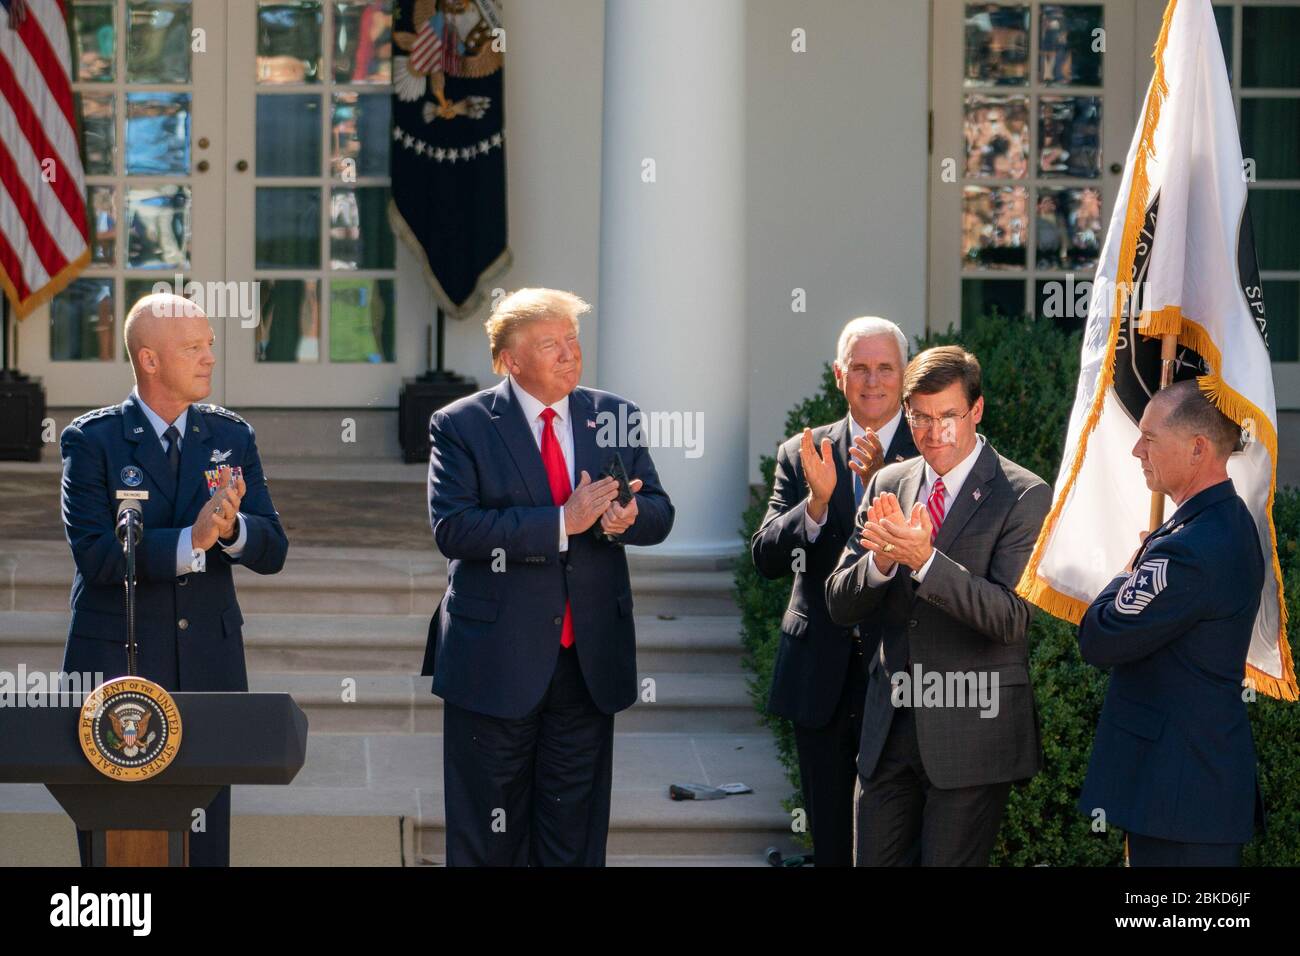 President Donald J. Trump, joined by Vice President Mike Pence, General John ”Jay” Raymond Commander of USSPACECOM, and Secretary of Defense Mark Esper as the flag of the U.S. Space Command (USSPACECOM) is unfurled by CCMSgt Roger Towberman Thursday, Aug. 29, 2019, in the Rose Garden of the White House. The Establishment of the U.S. Space Command Stock Photo